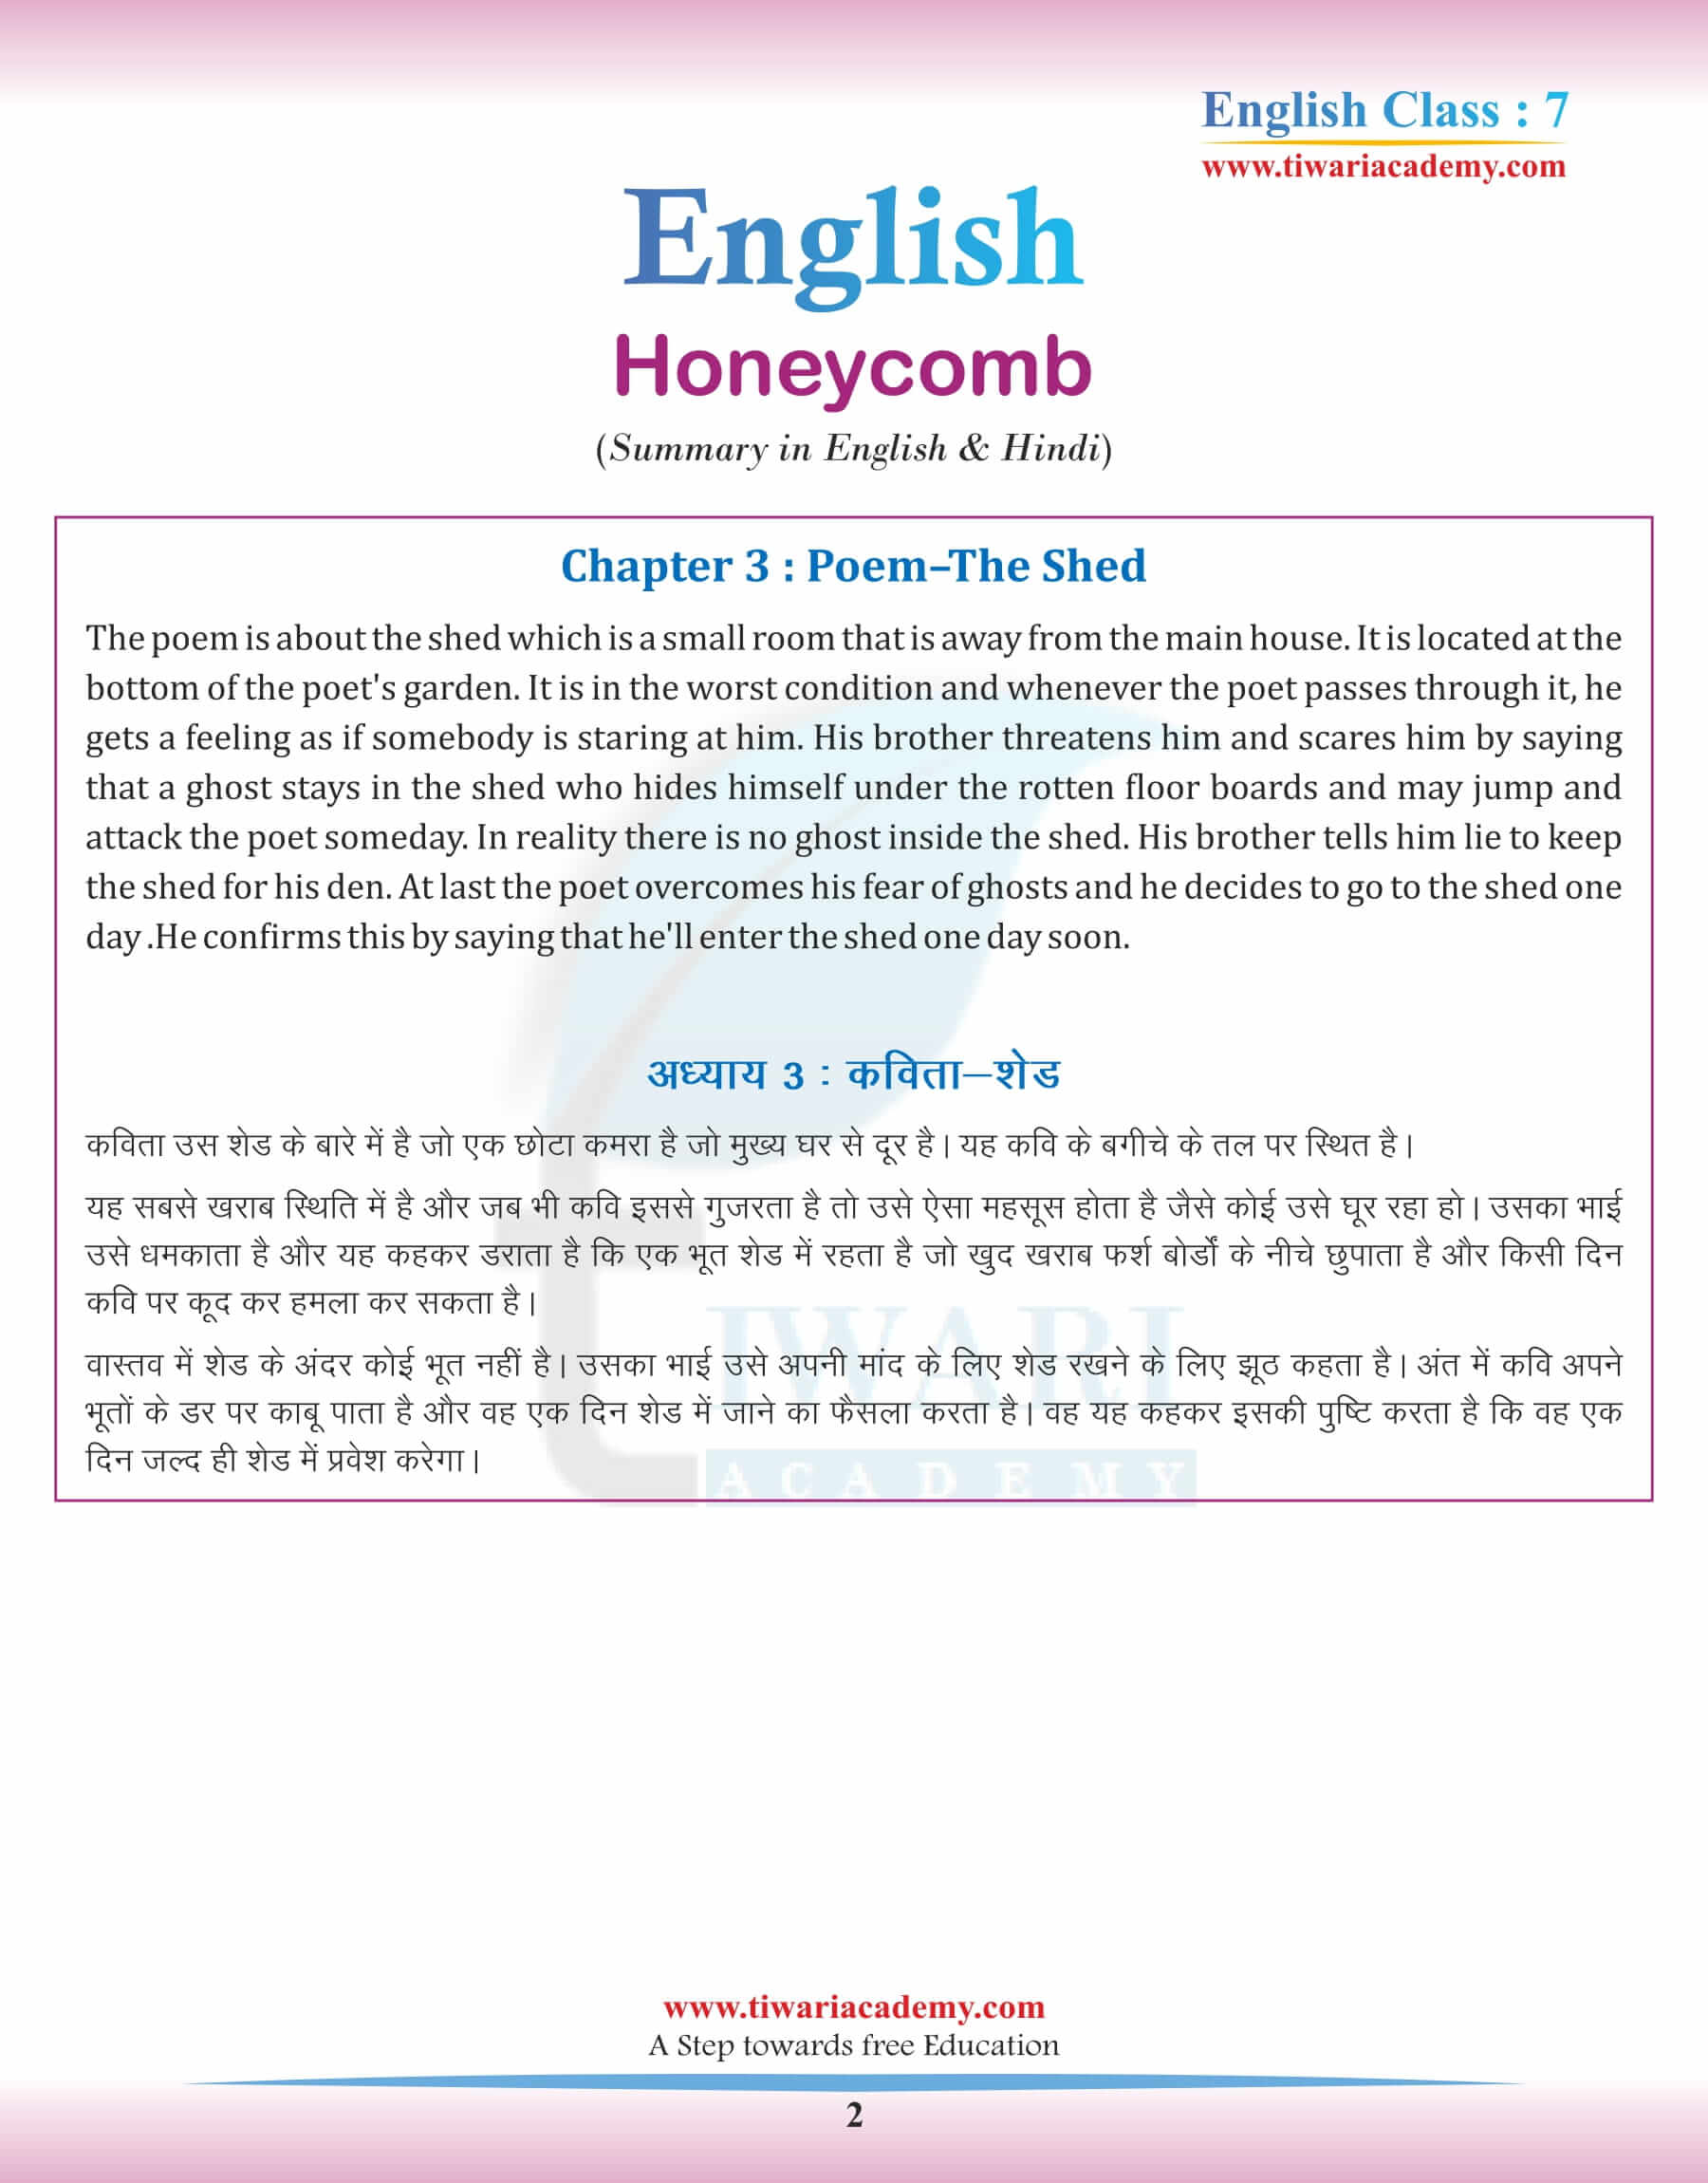 Class 7 English Chapter 3 Poem Summary in Hindi and English